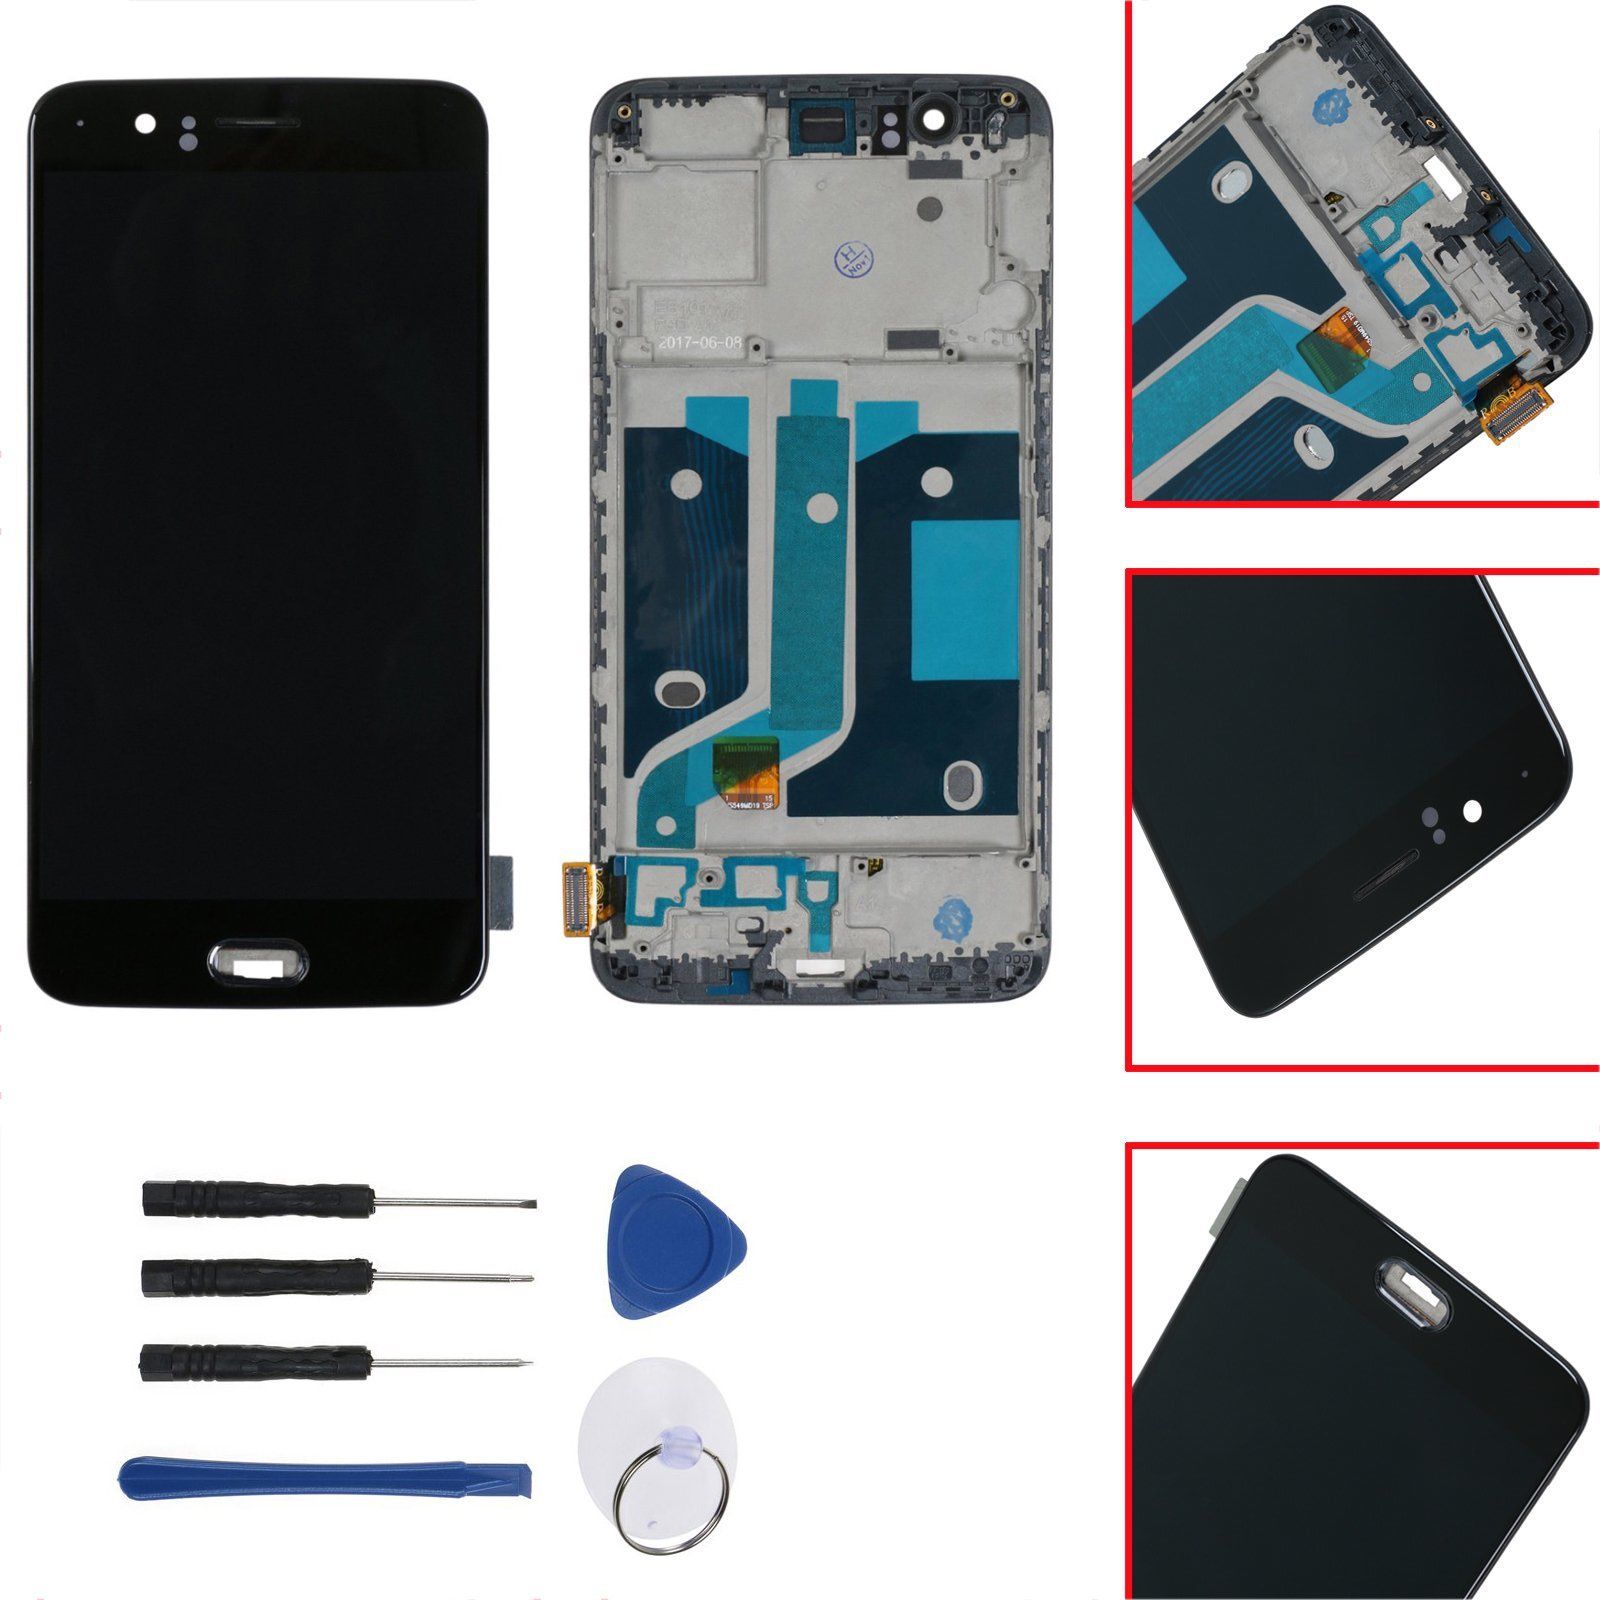 LCD Display Touch Screen Frame Digitizer Assembly + Tools for Oneplus 5 A5000